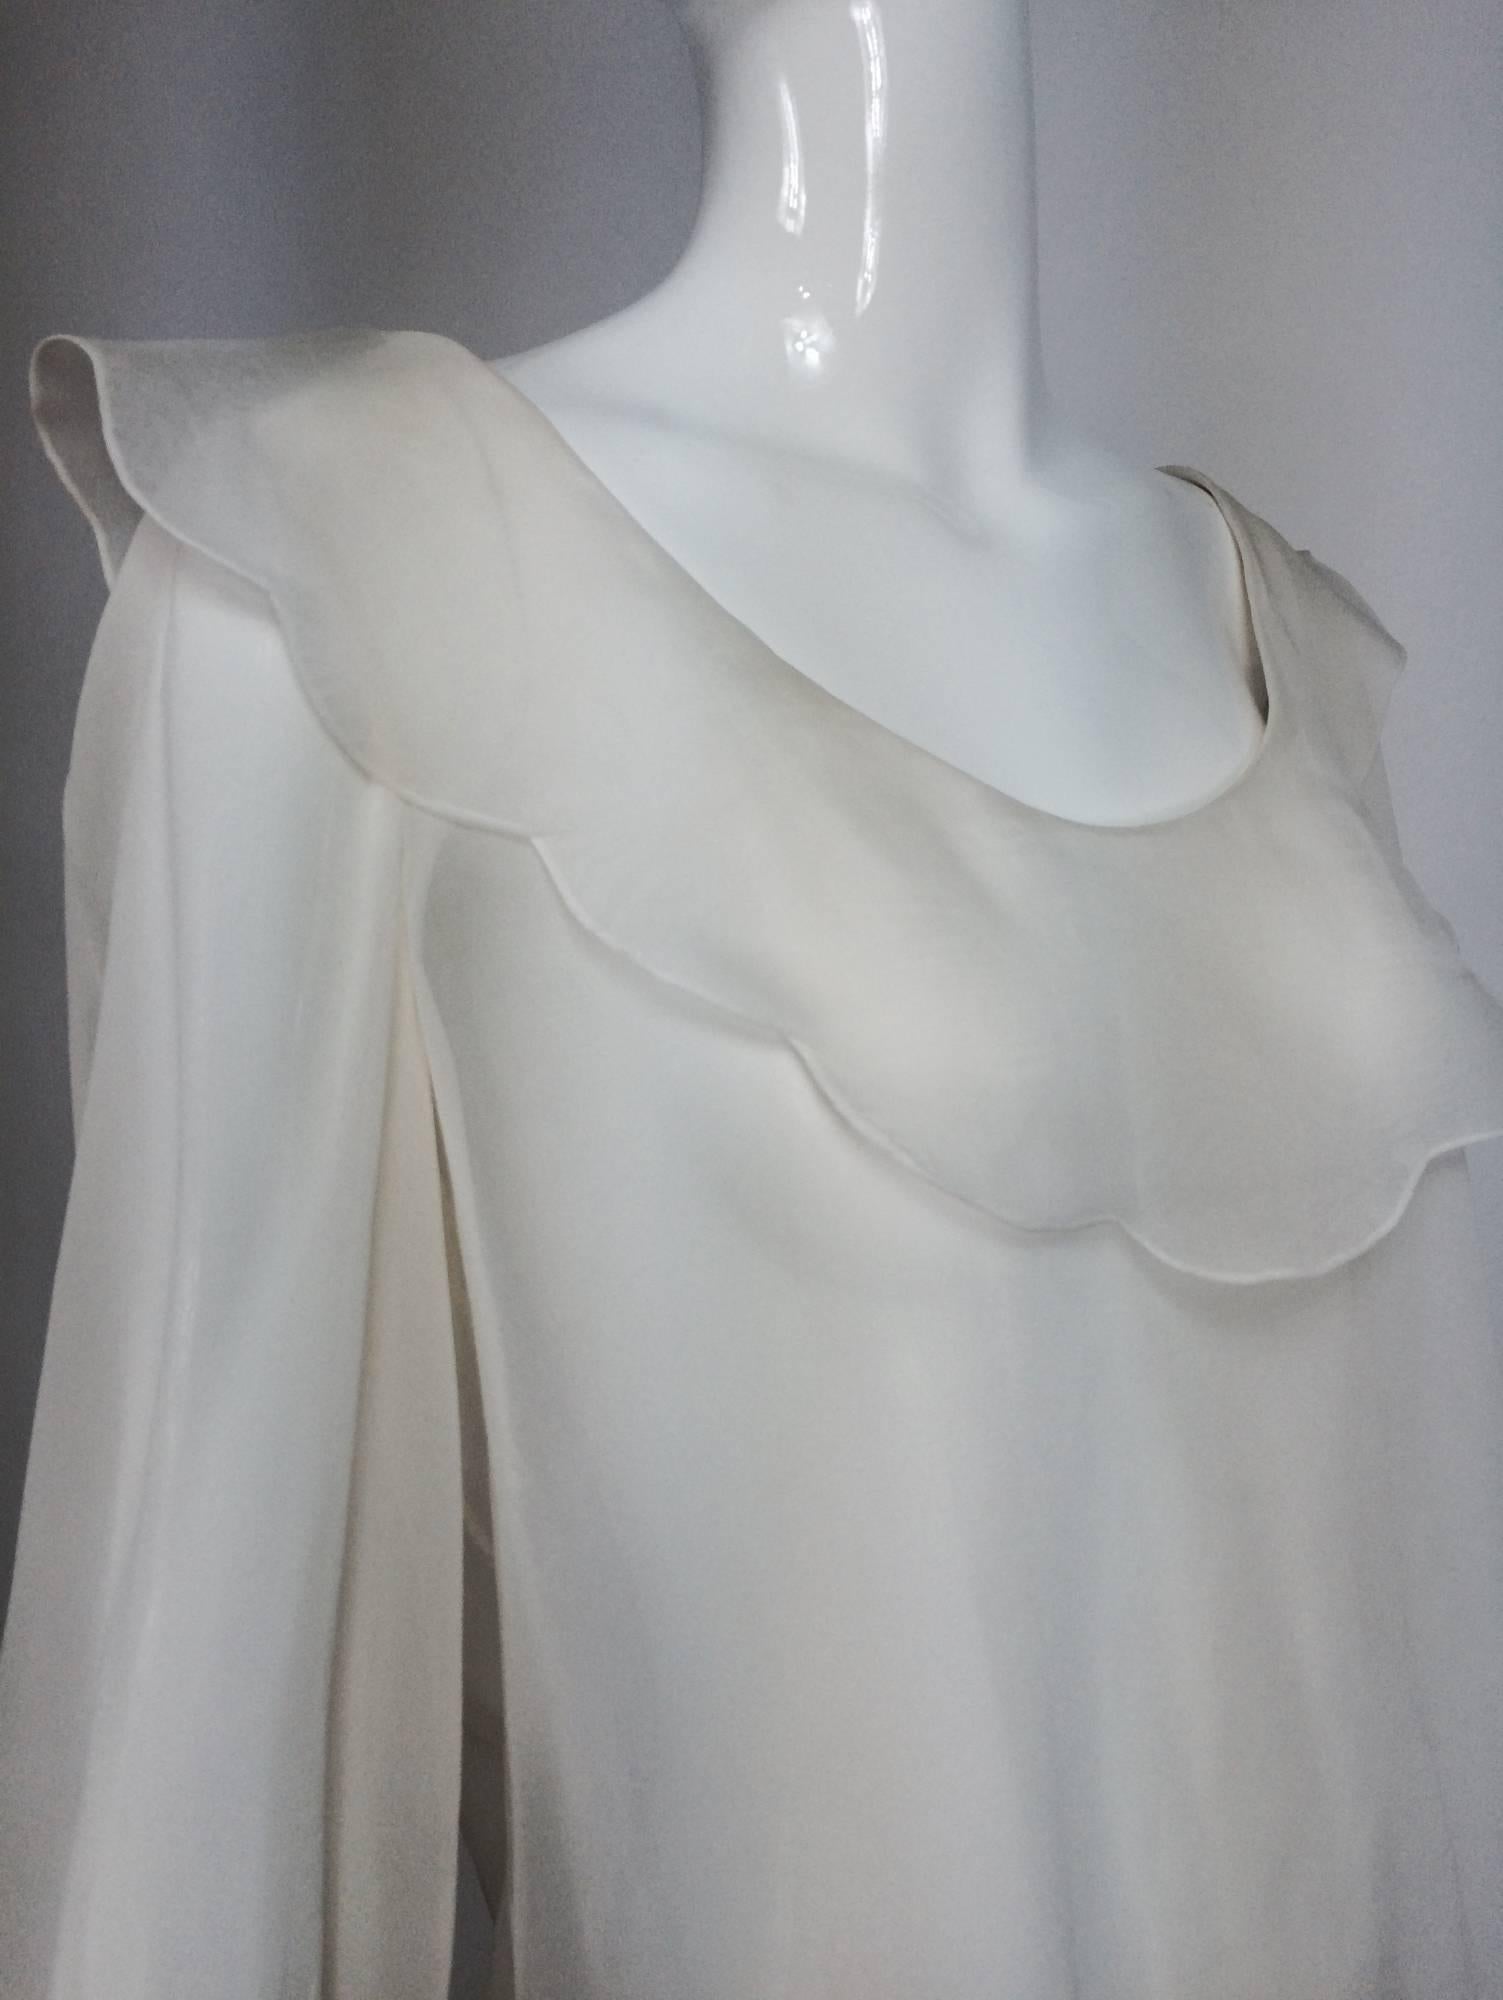 Valentino off white silk chiffon poet blouse large...Beautiful & romantic...Low round neckline has a scalloped organza collar...Long full sleeves with organza ruffle cuffs...Buttons up the back...Unlined

In excellent wearable condition... All our